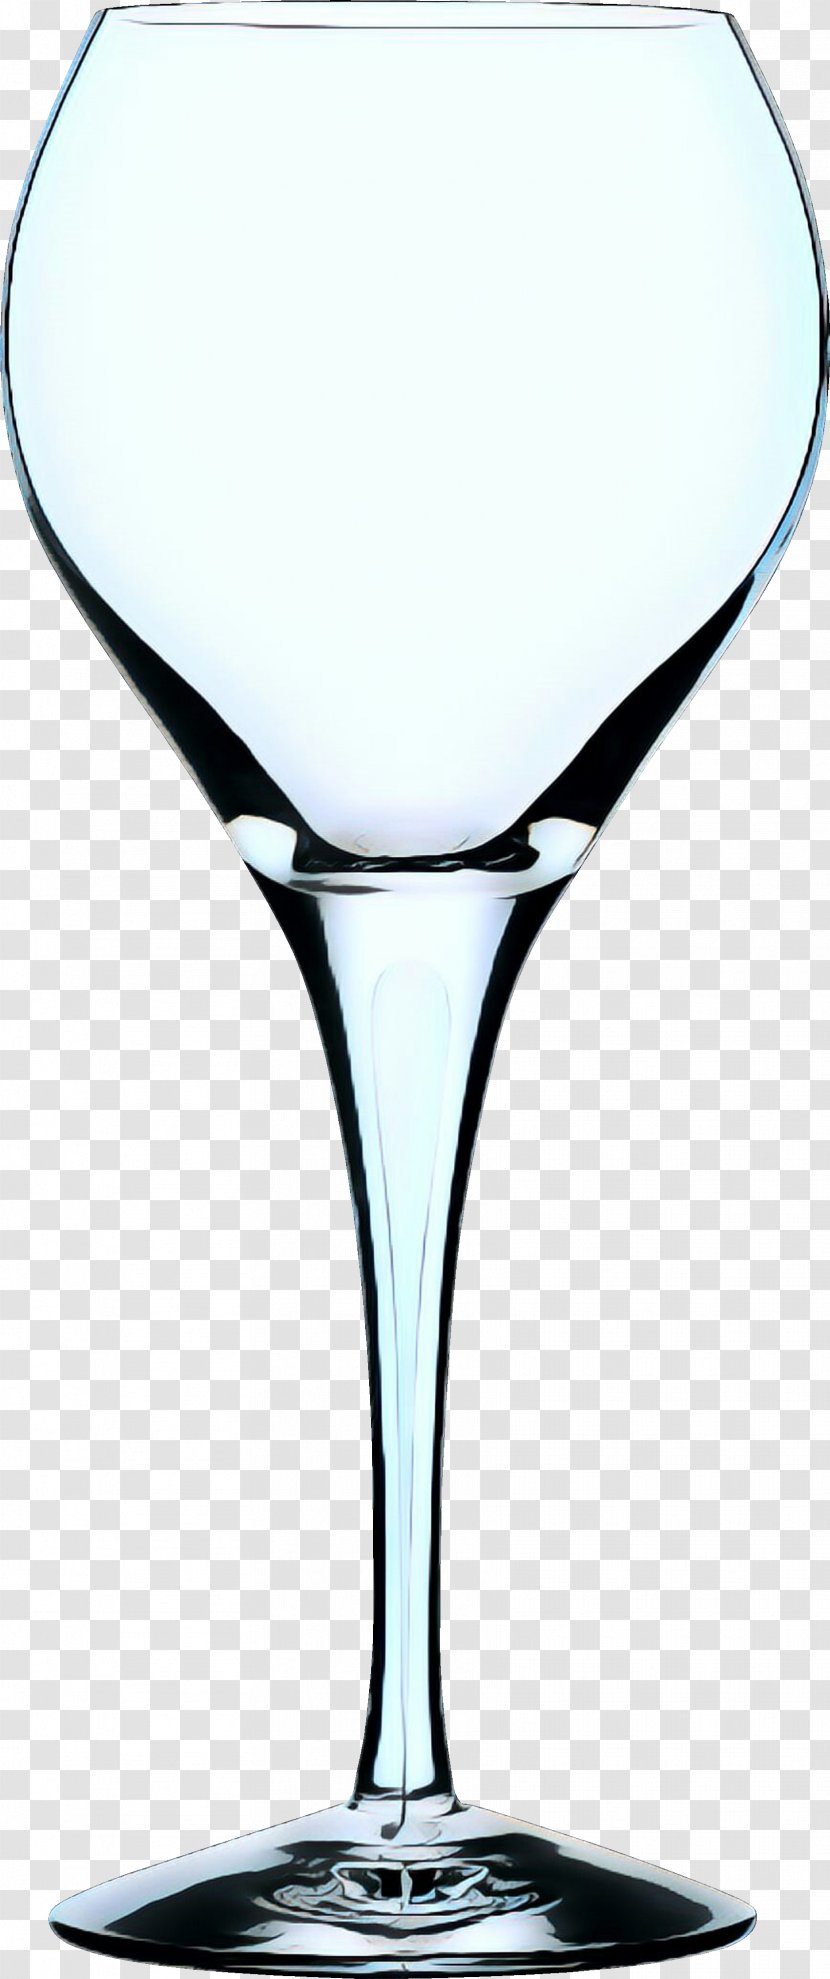 Champagne Glasses Background - Sparkling Wine - Tableware Martini Glass Transparent PNG